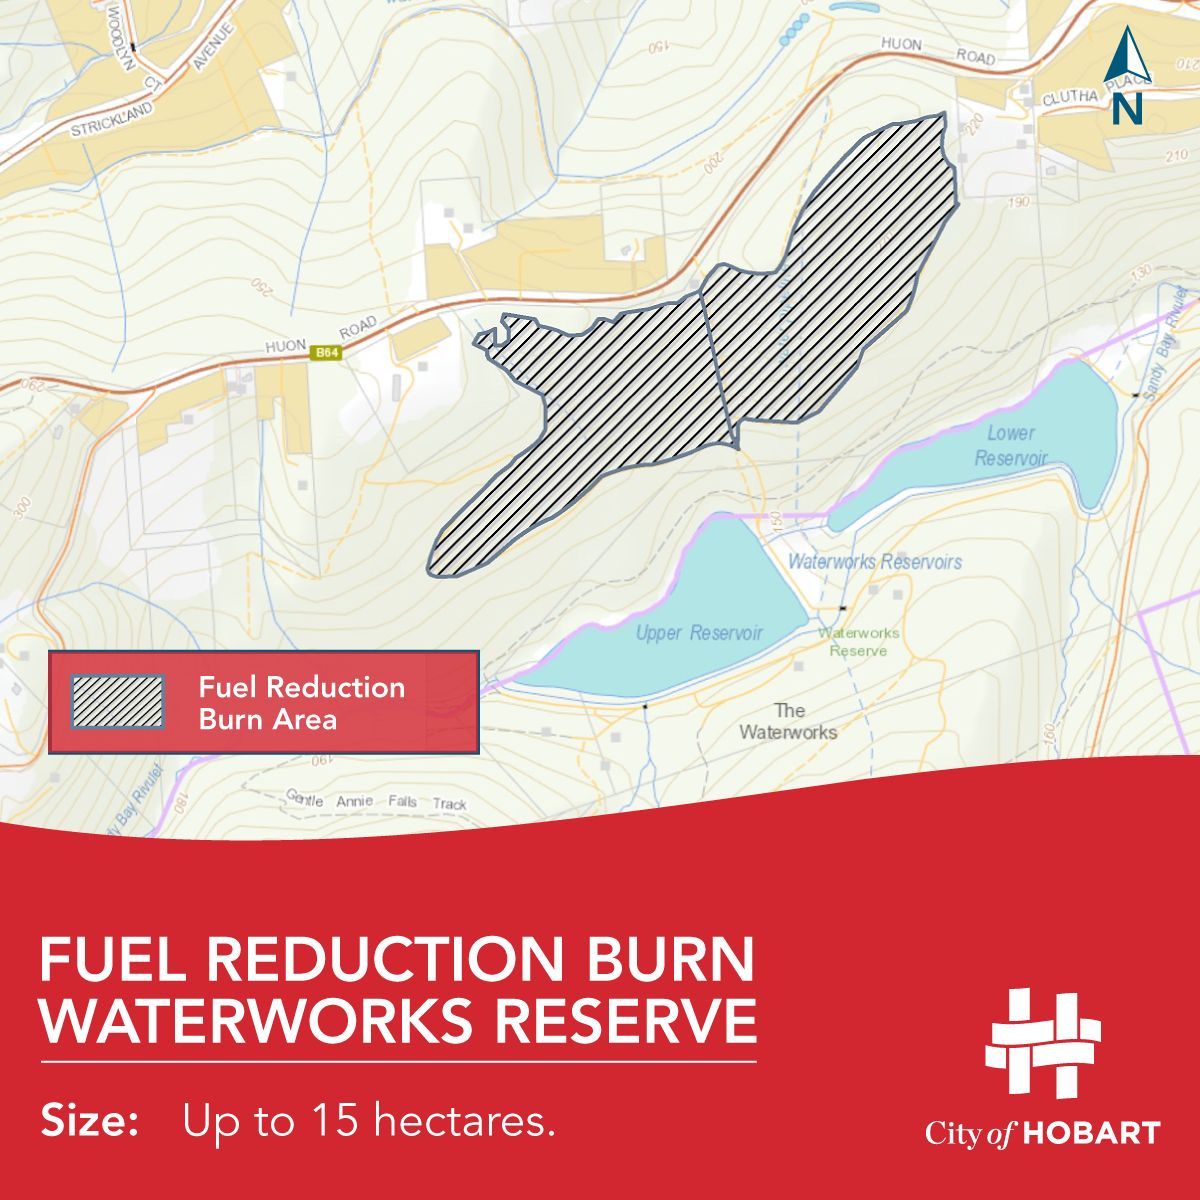 We plan to continue a fuel reduction burn in South Hobart today, Wednesday 15 November. Some smoke may be produced, but we will make every effort to minimise the impact on nearby areas. For more information about this burn read our Burn Alert - bit.ly/HuonRd-Burn-Al…